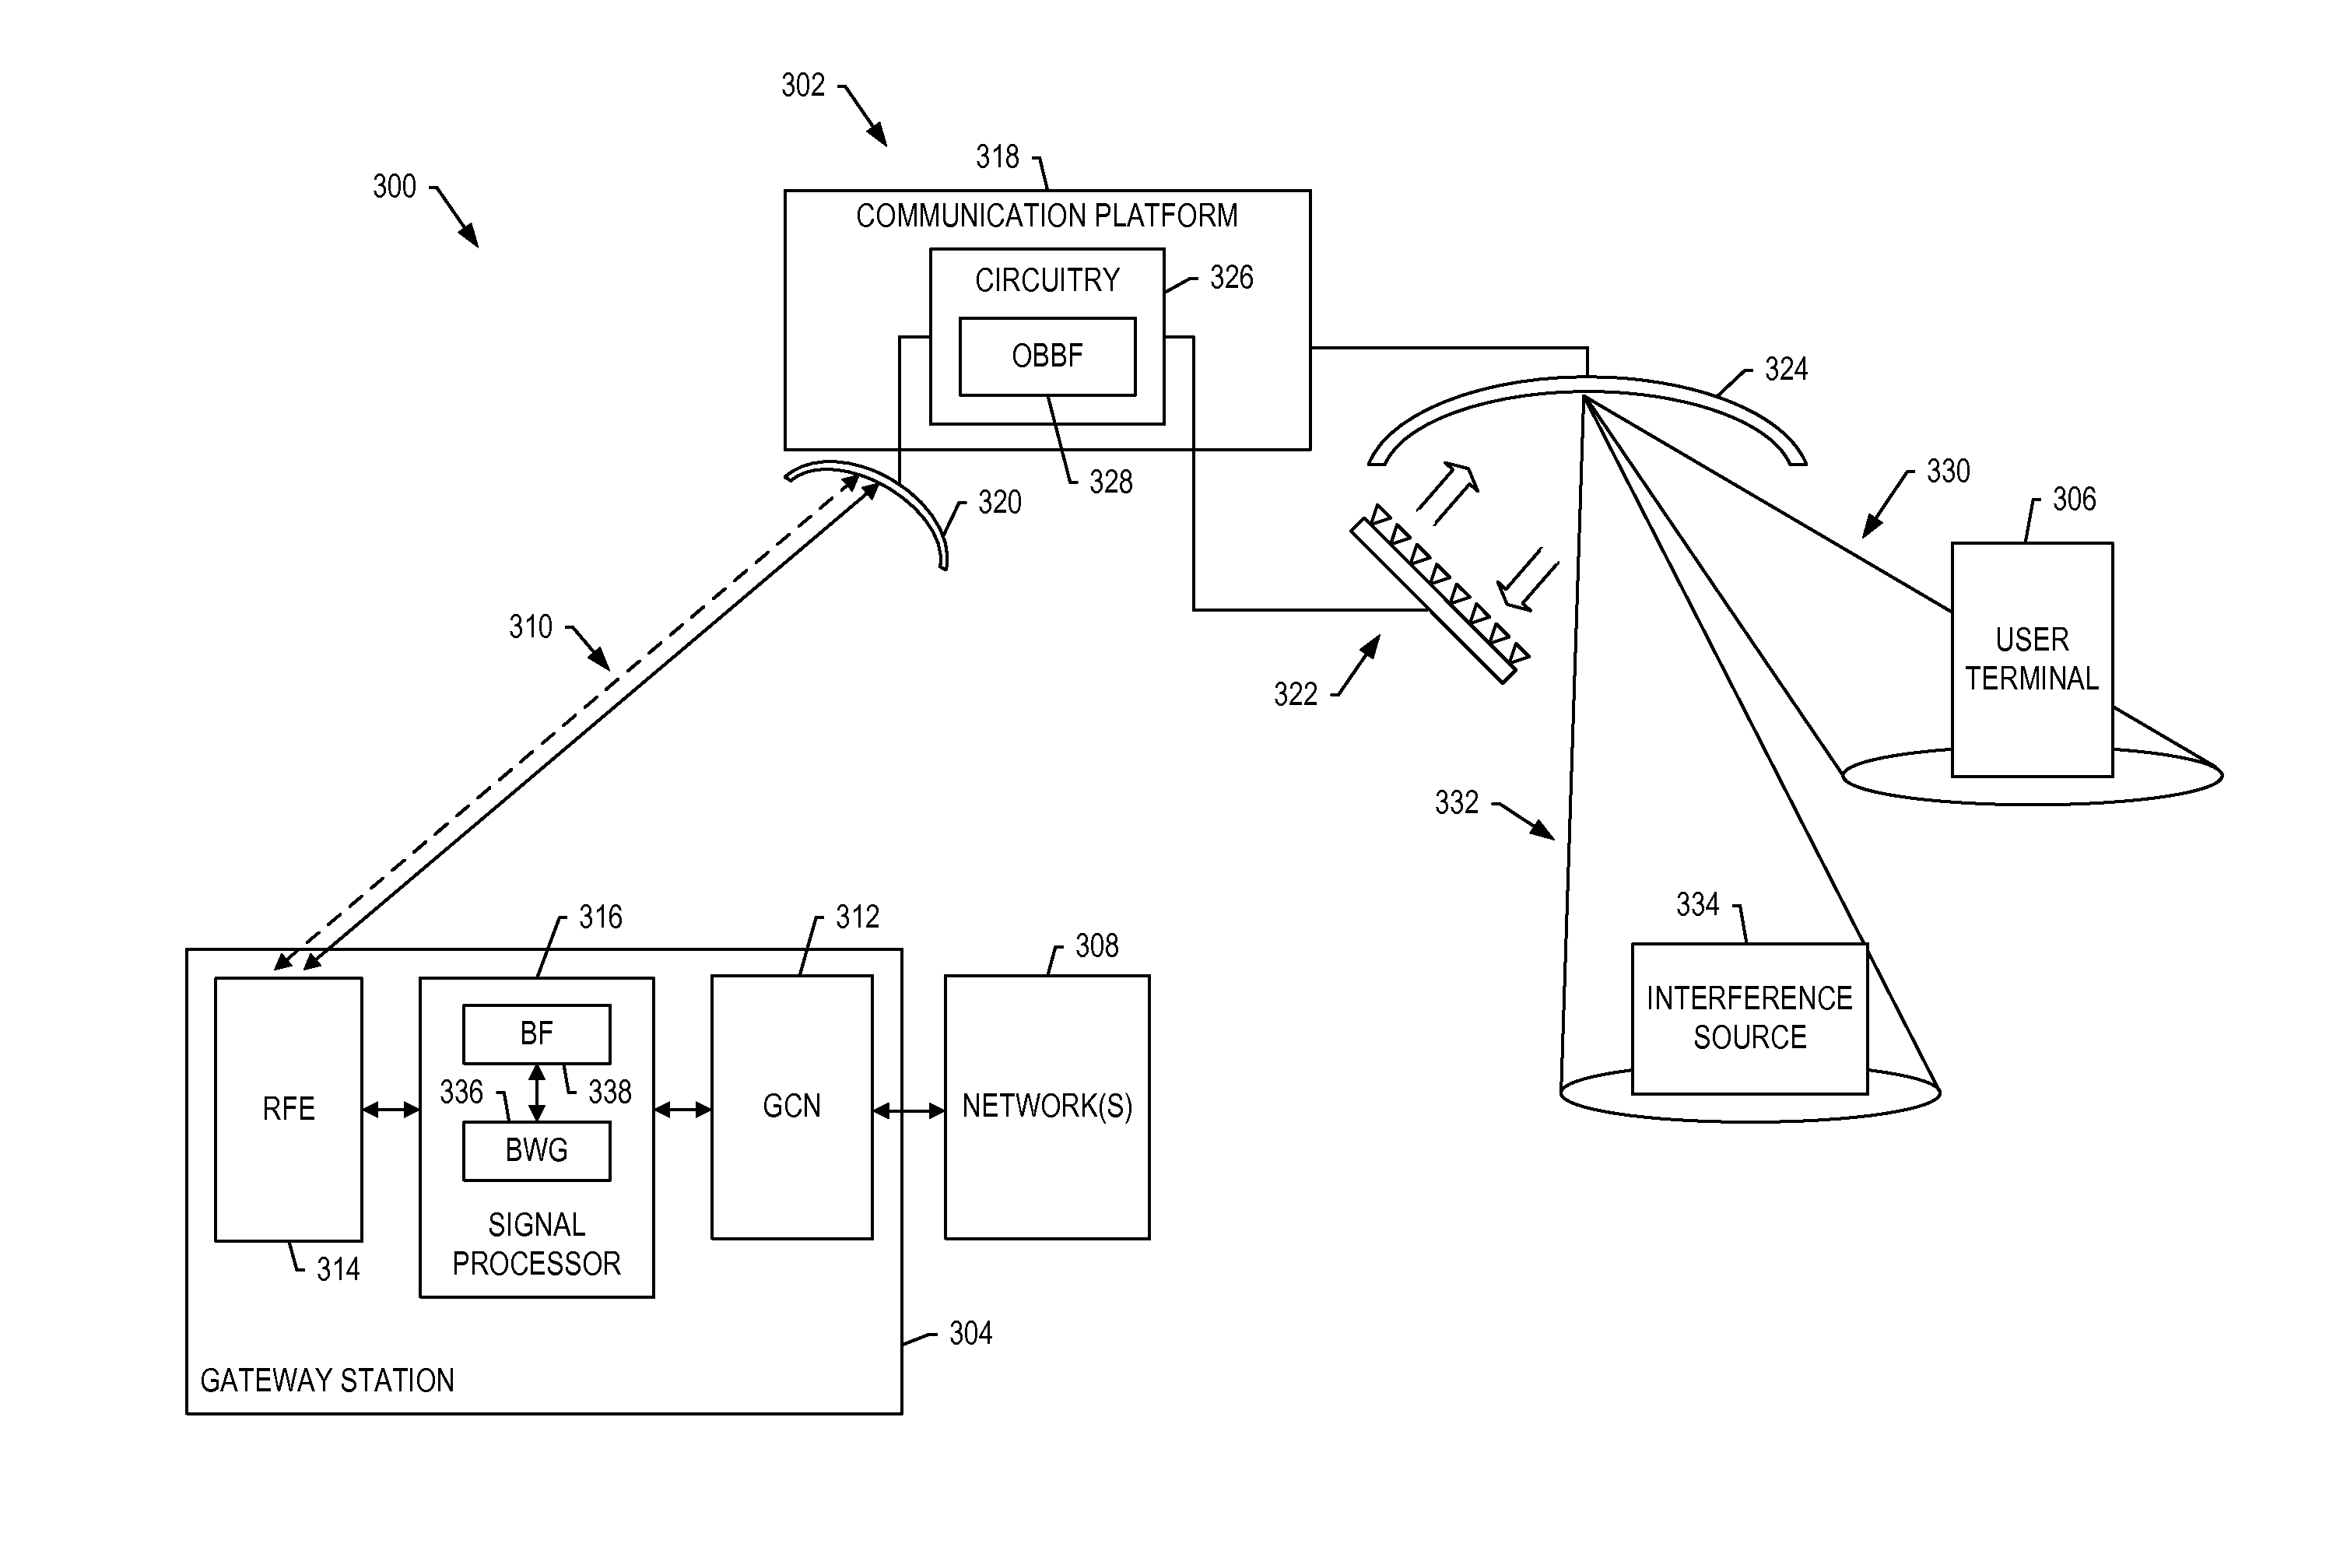 Interference suppression in a satellite communication system using onboard beamforming and ground-based processing